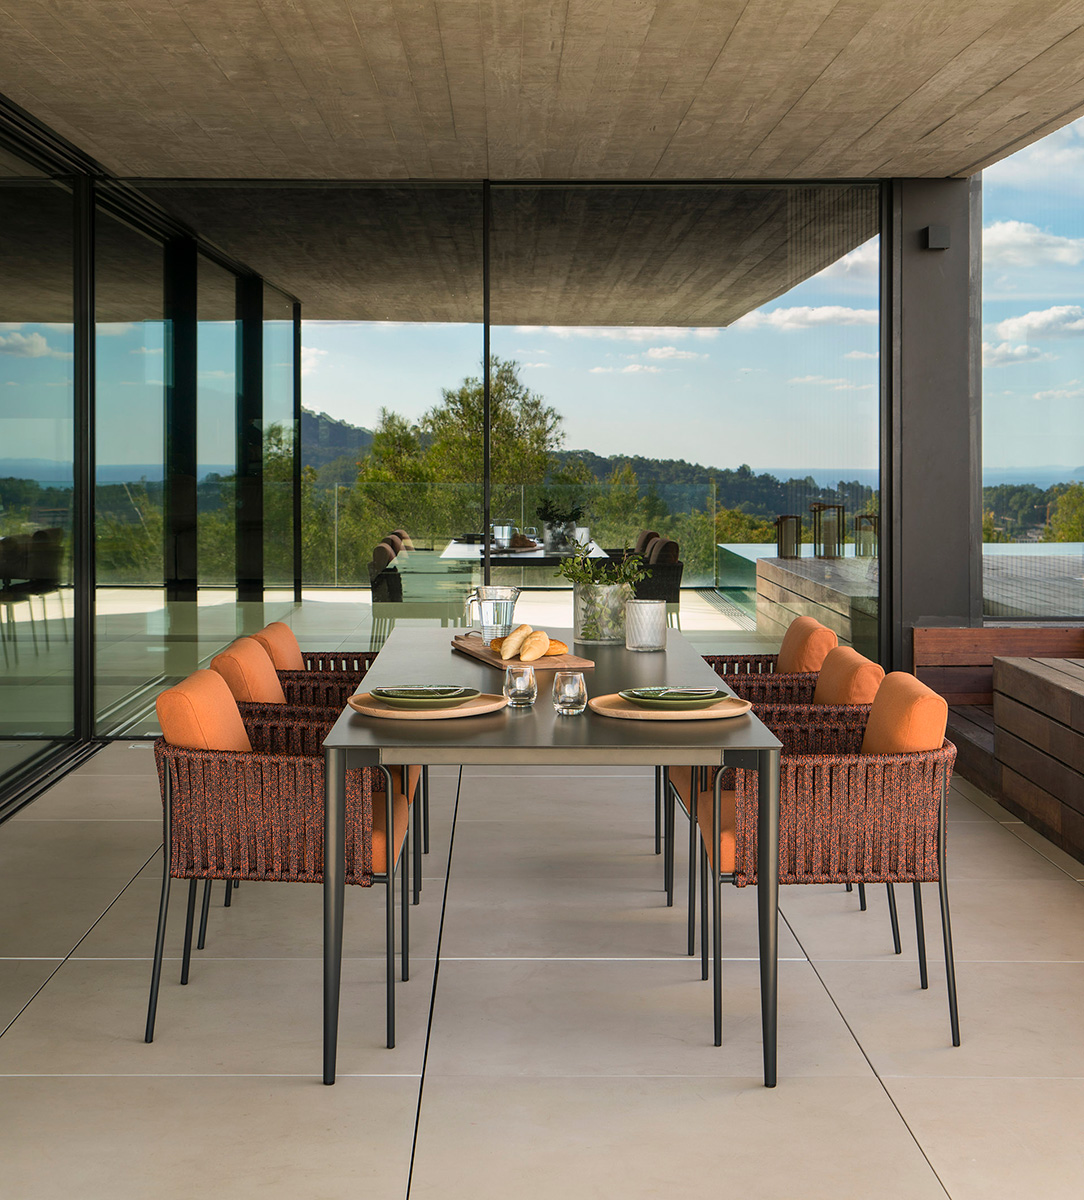 projects - outdoor furniture projects - villa boscana, fascinating architecture in mallorca